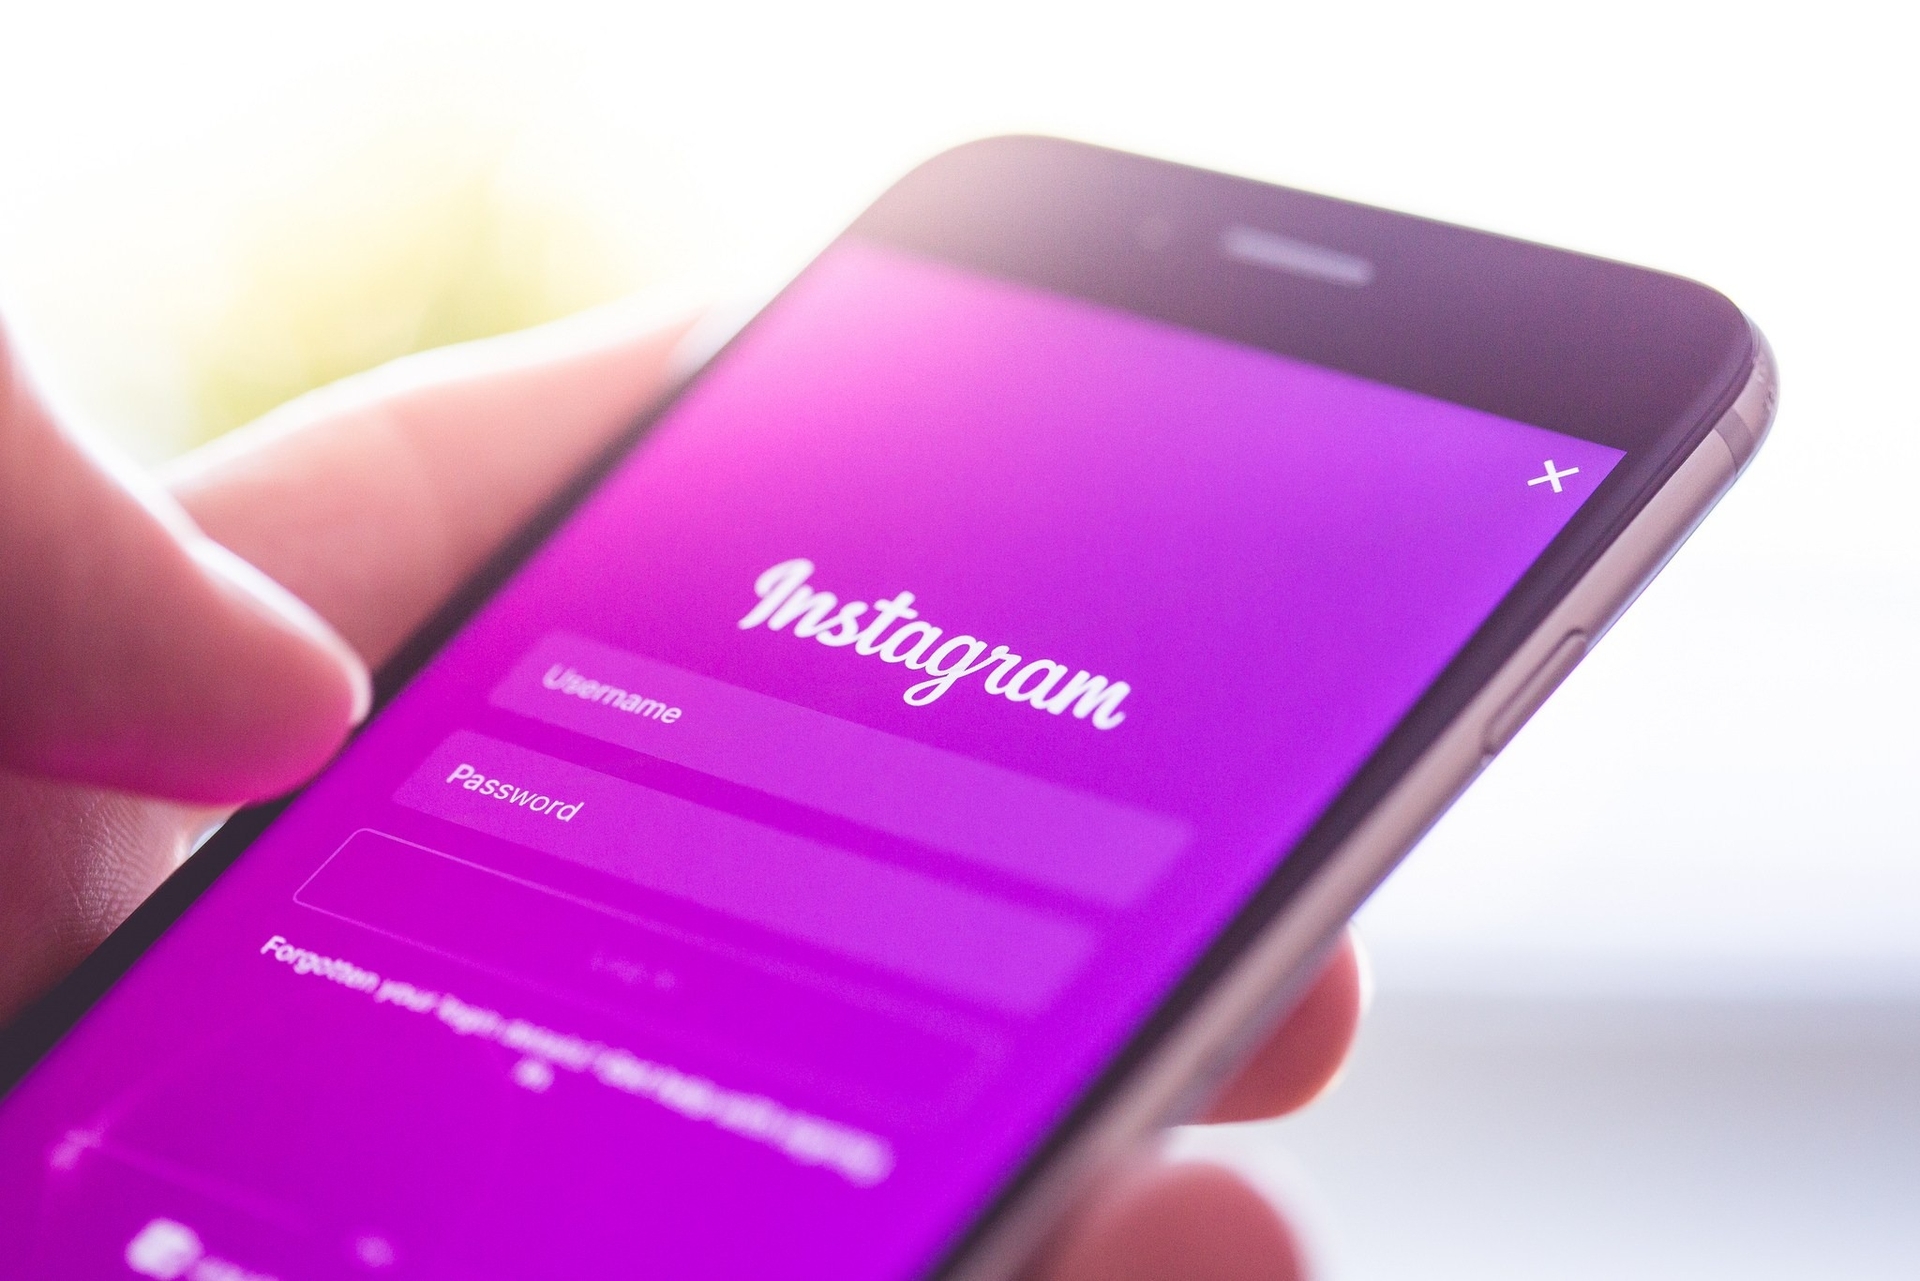 In this guide, we will go over how to hide followers list on Instagram, so you don't have to worry about people learning which accounts you have followed.